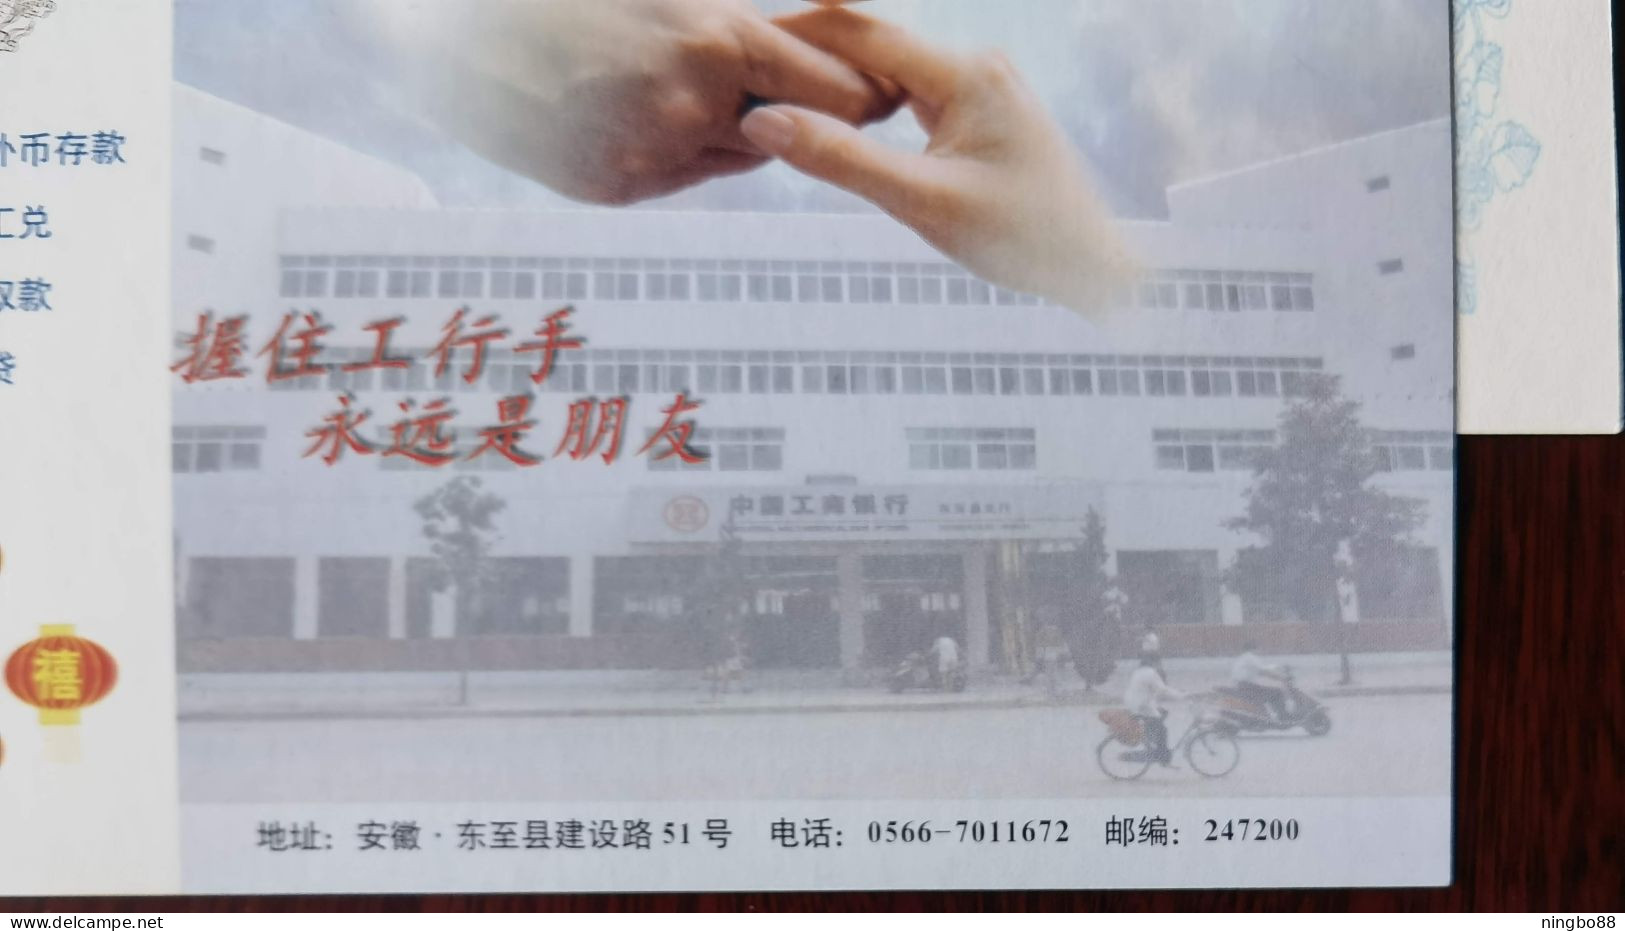 Street Bicycle Cycling,bike,China 2000 Industrial And Commercial Bank Of China Dongzhi Branch Advert Pre-stamped Card - Cycling